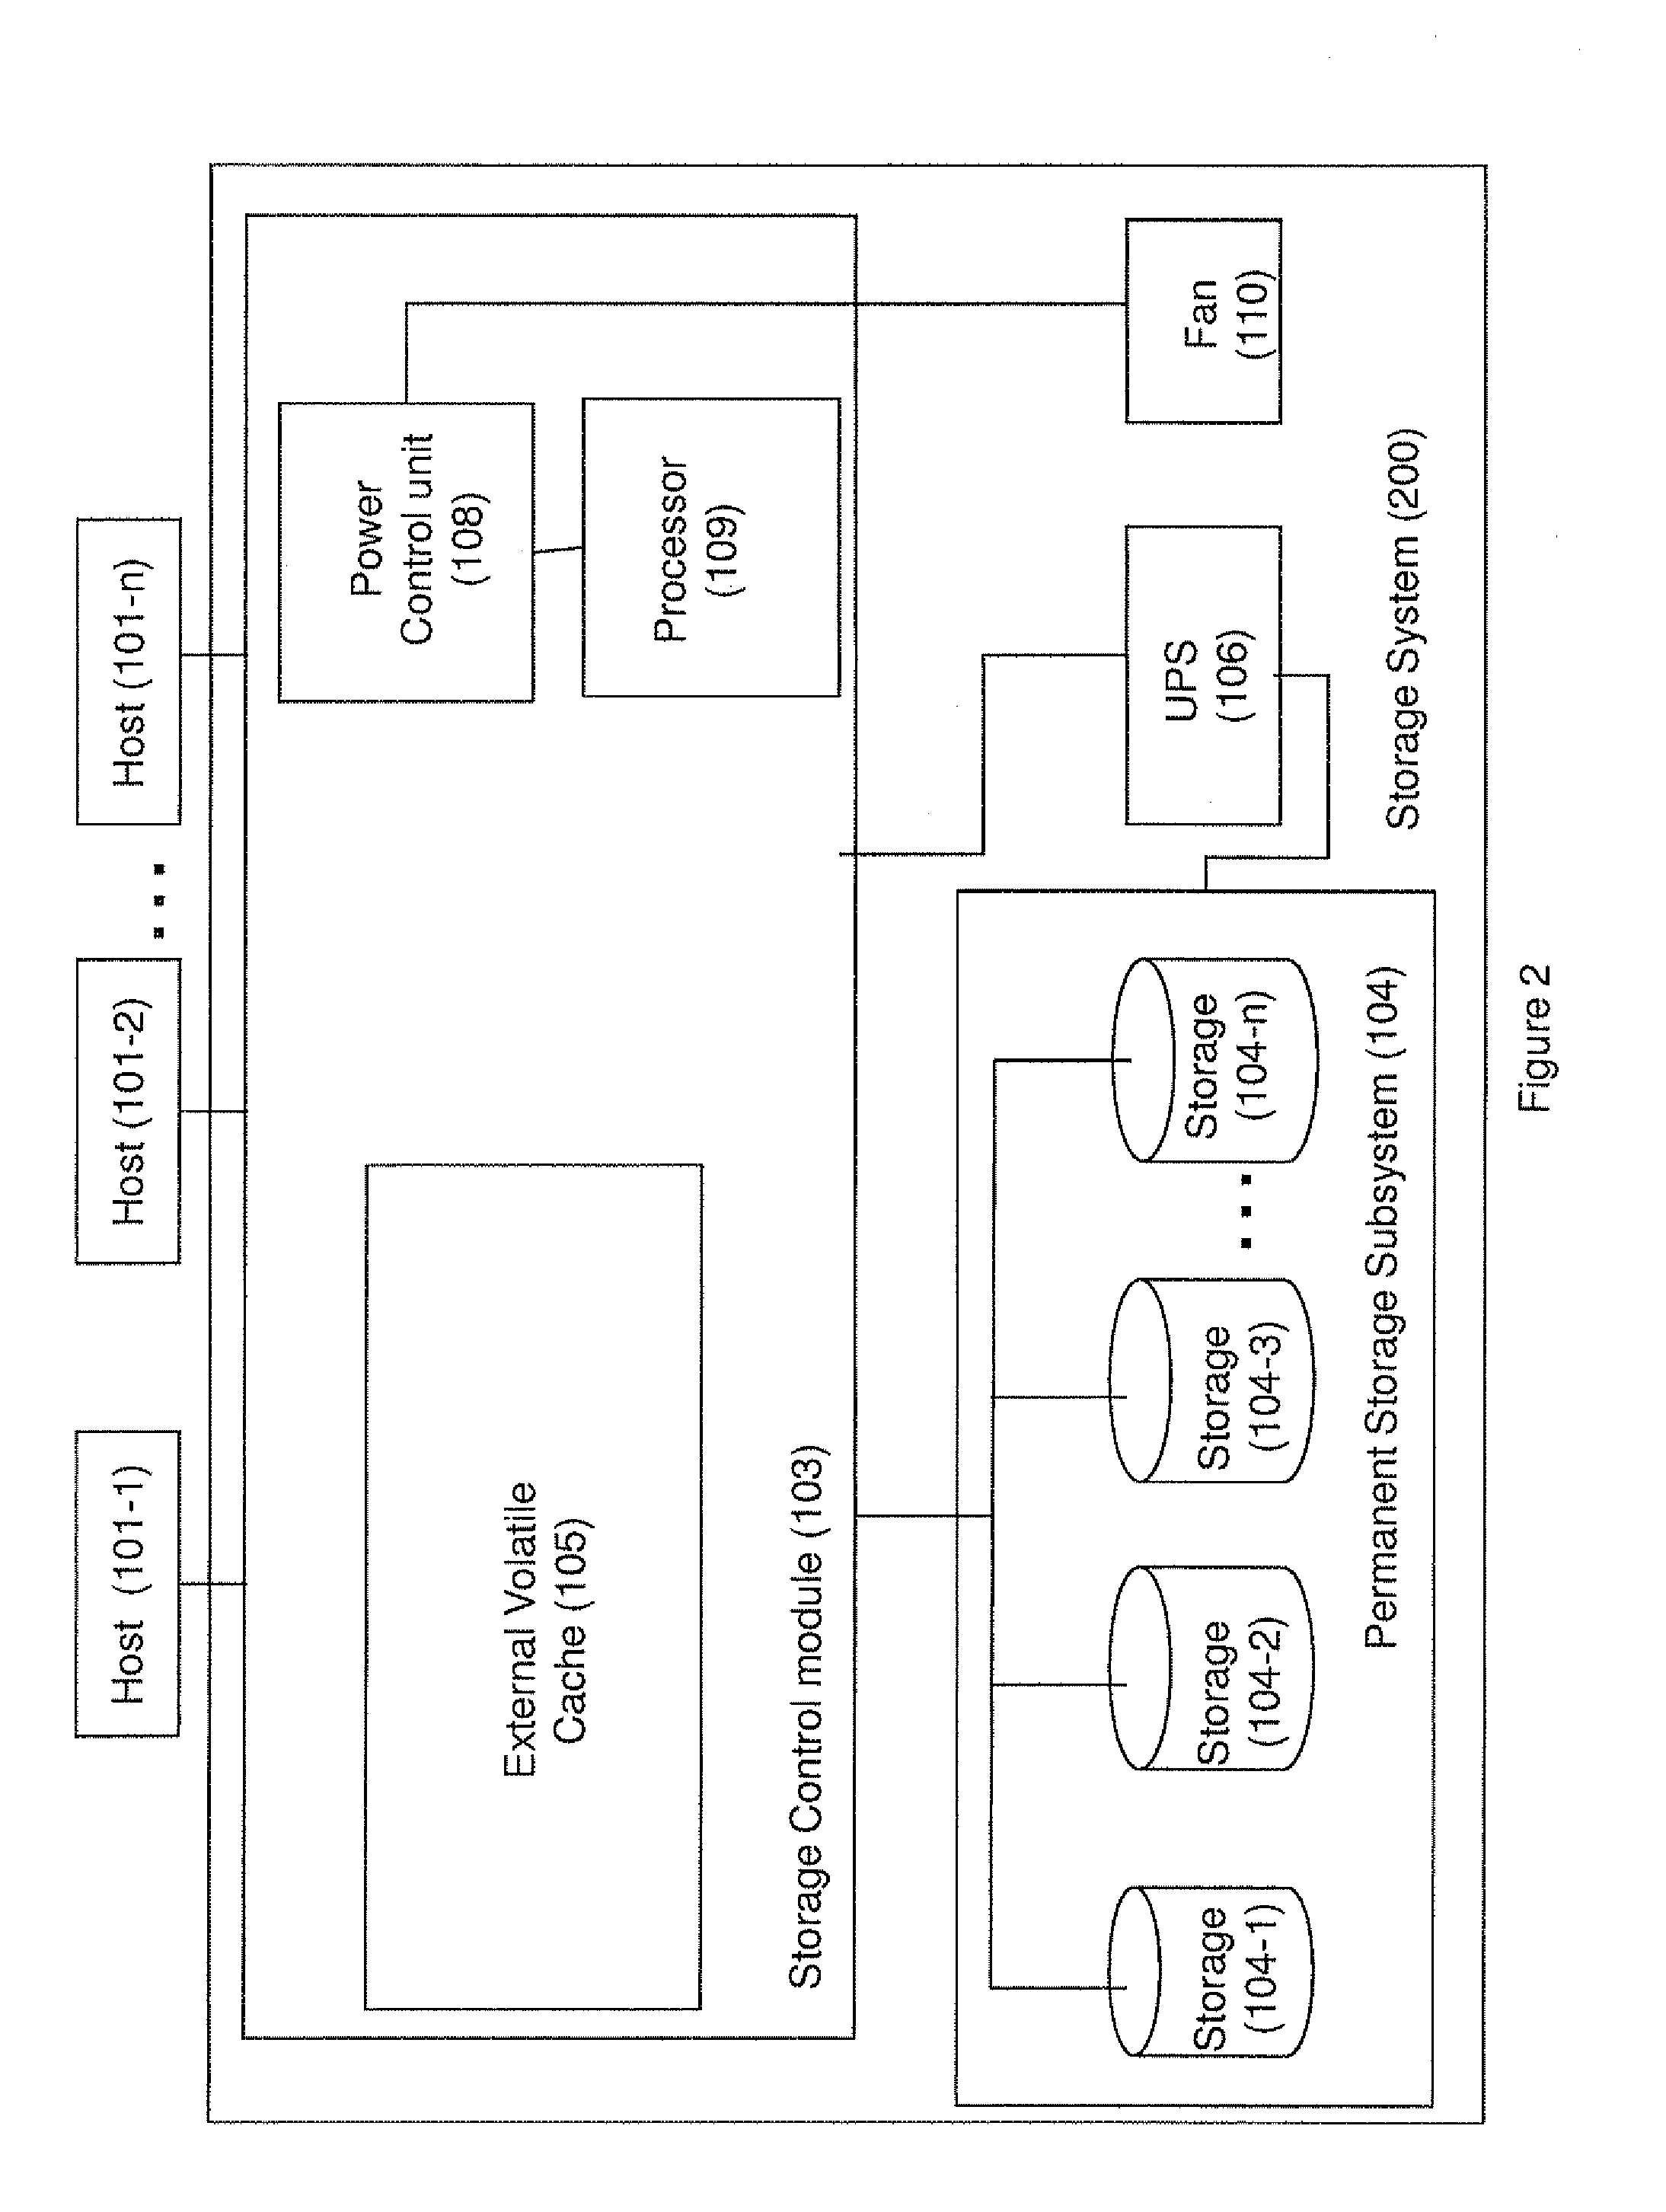 Method and system for reducing power consumption of peripherals in an emergency shut-down